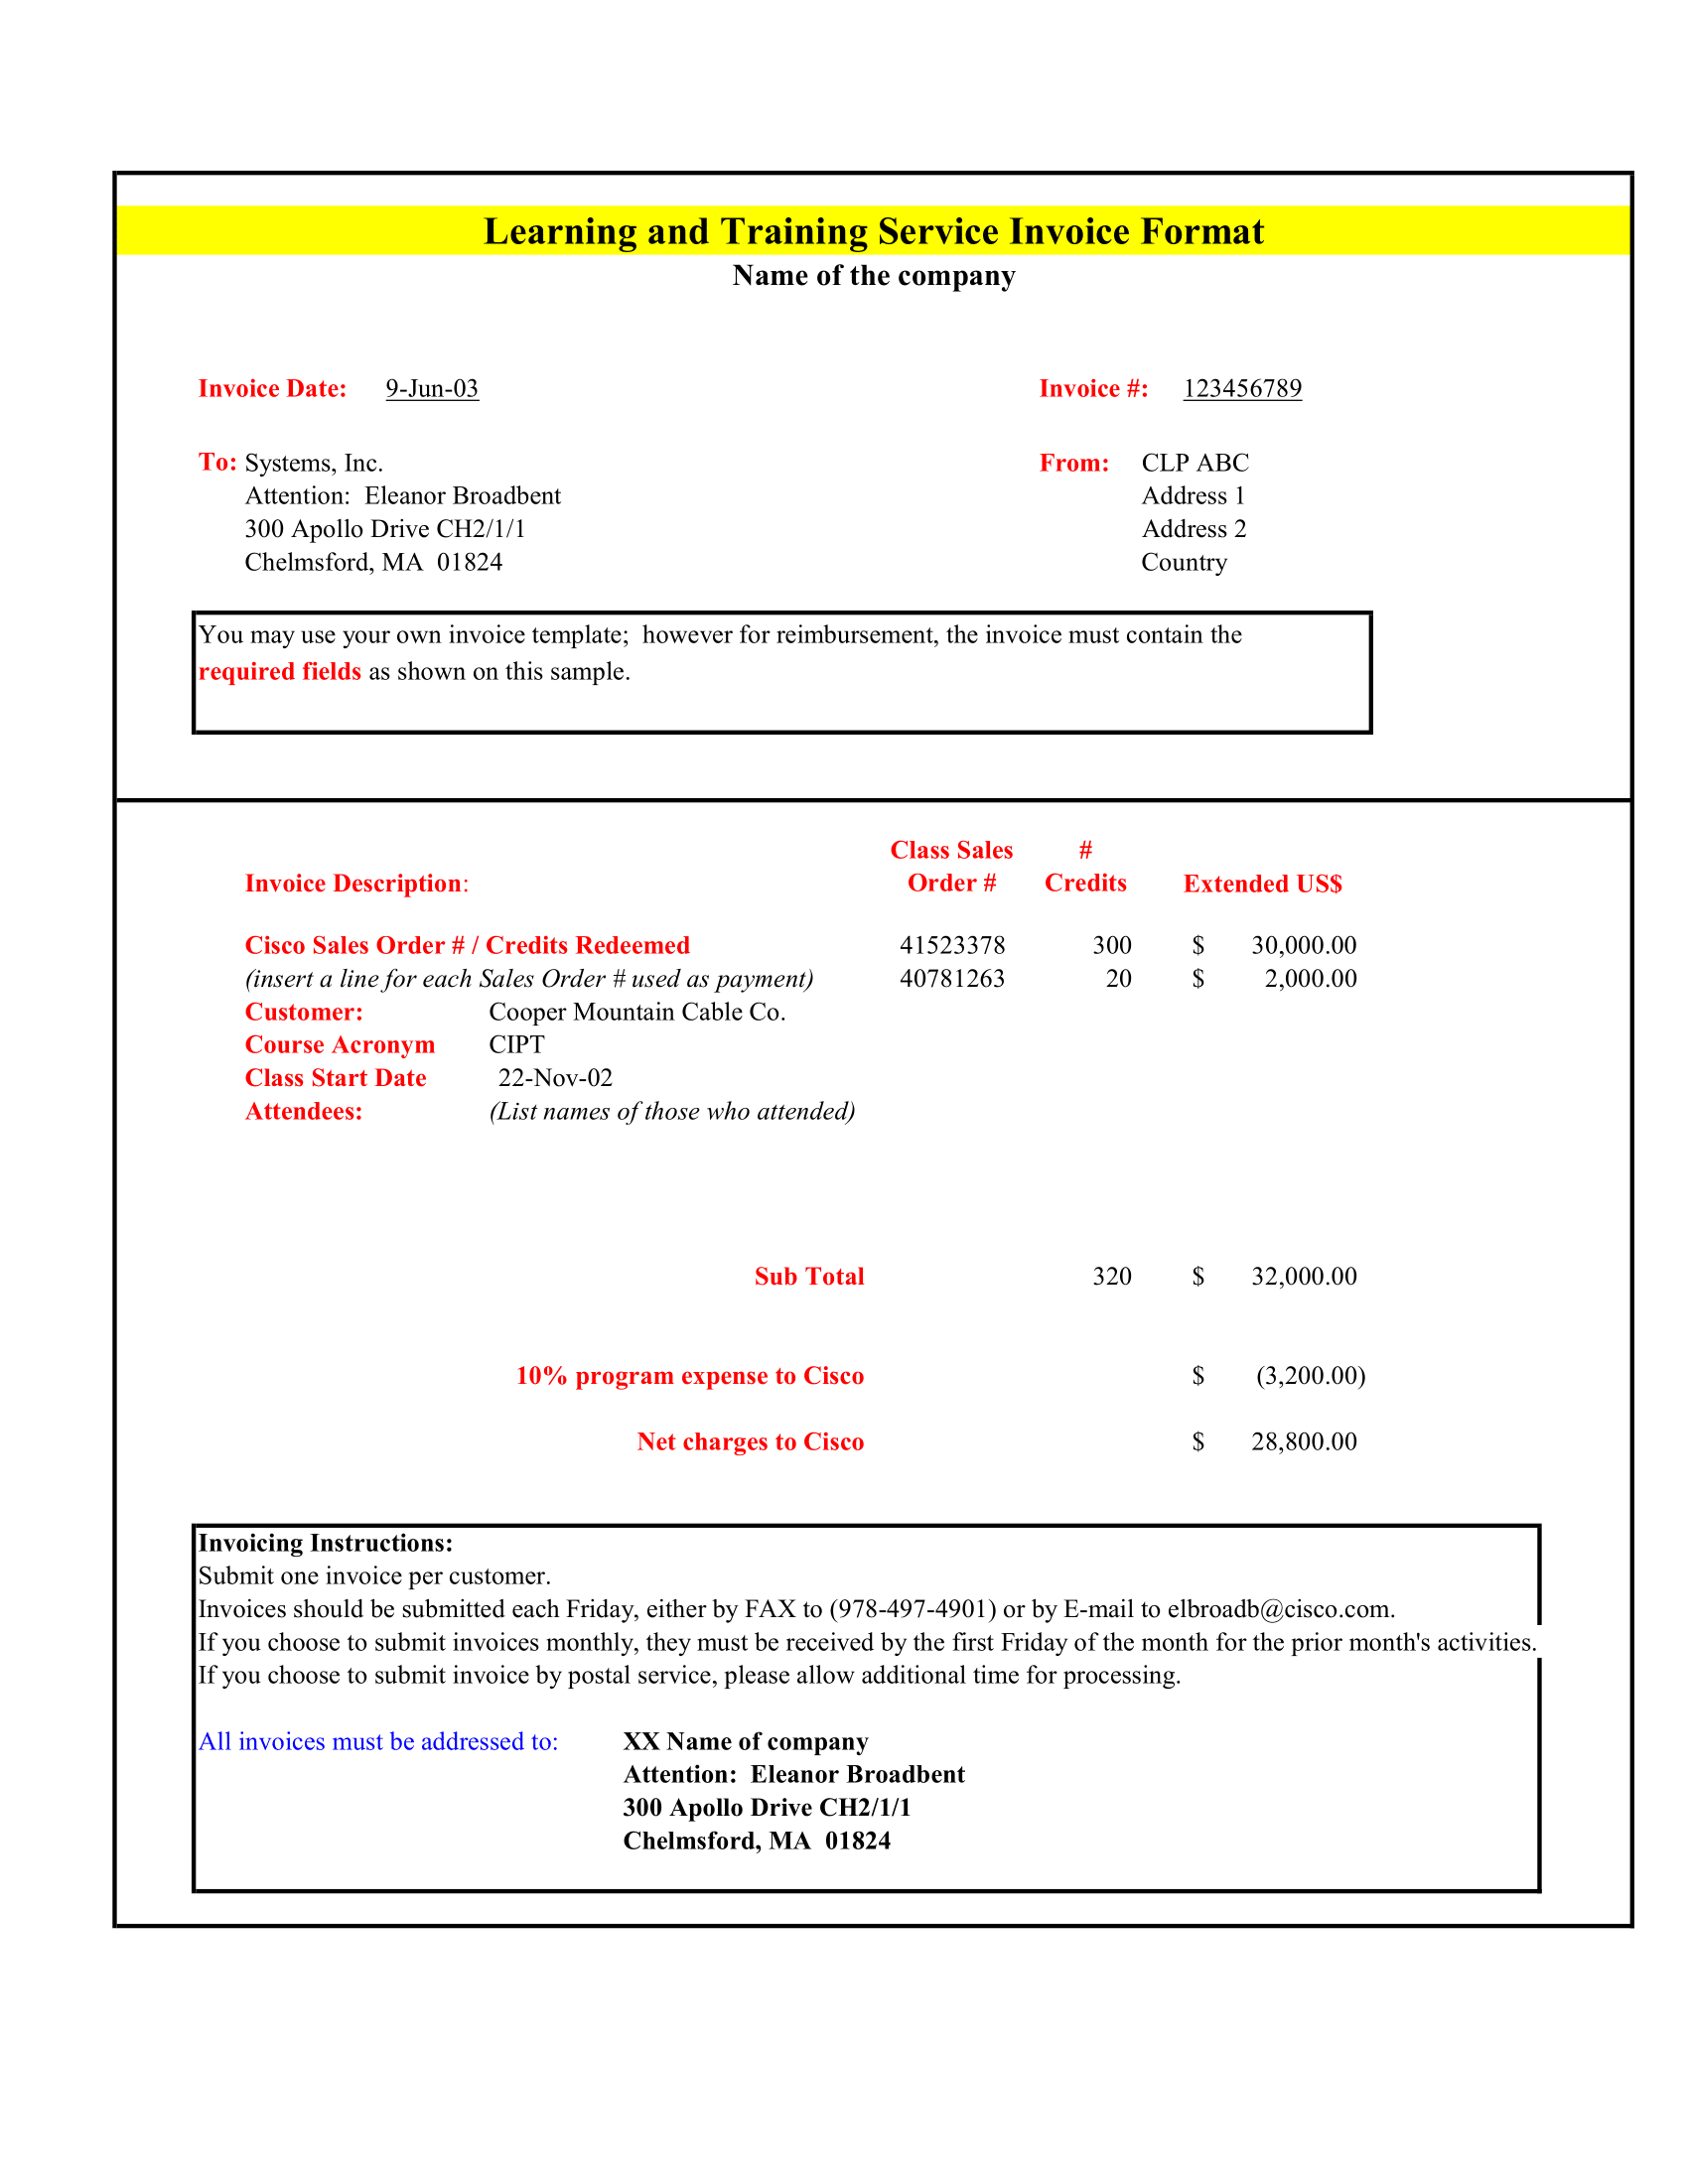 Learning and Training Service Invoice Format